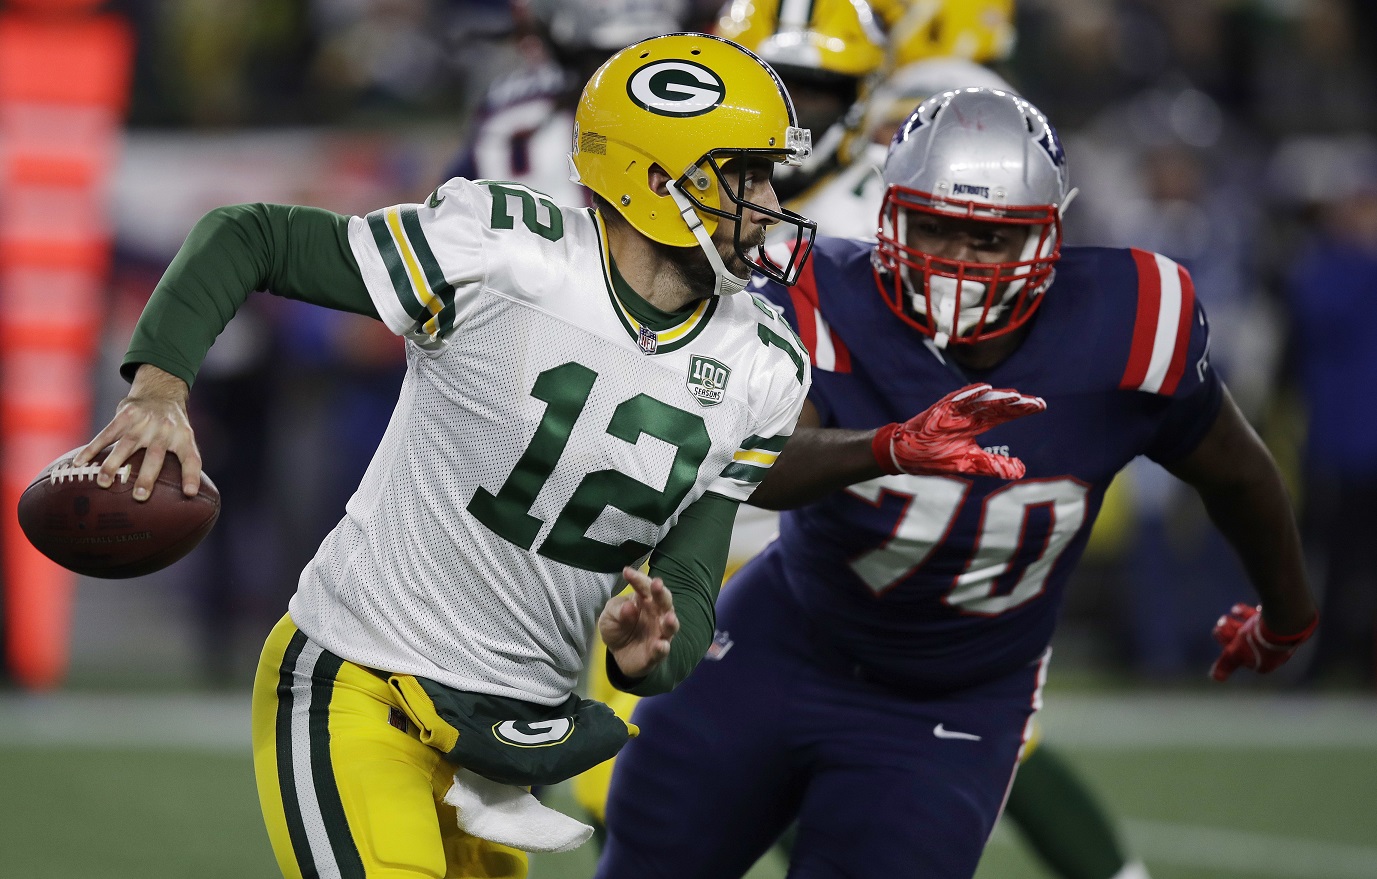 Late fumble does in Packers in showdown with Pats